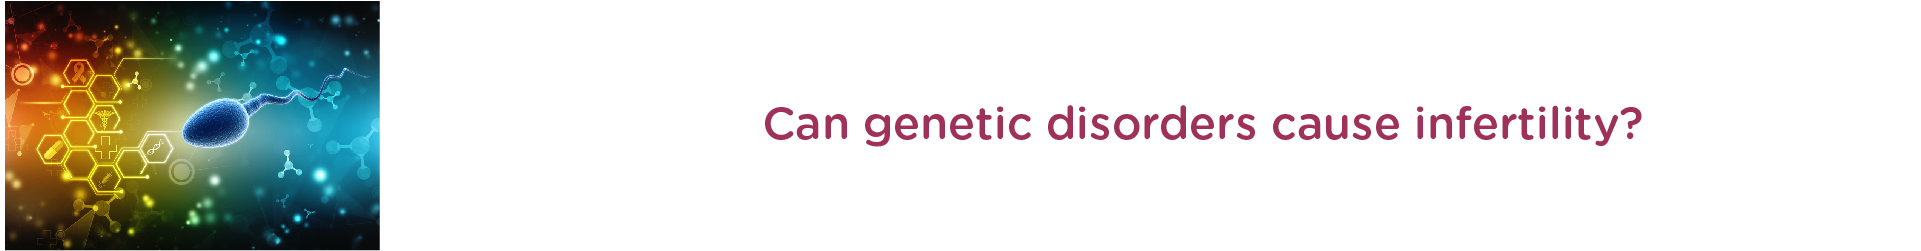 Can Genetic Disorder Cause Infertility?